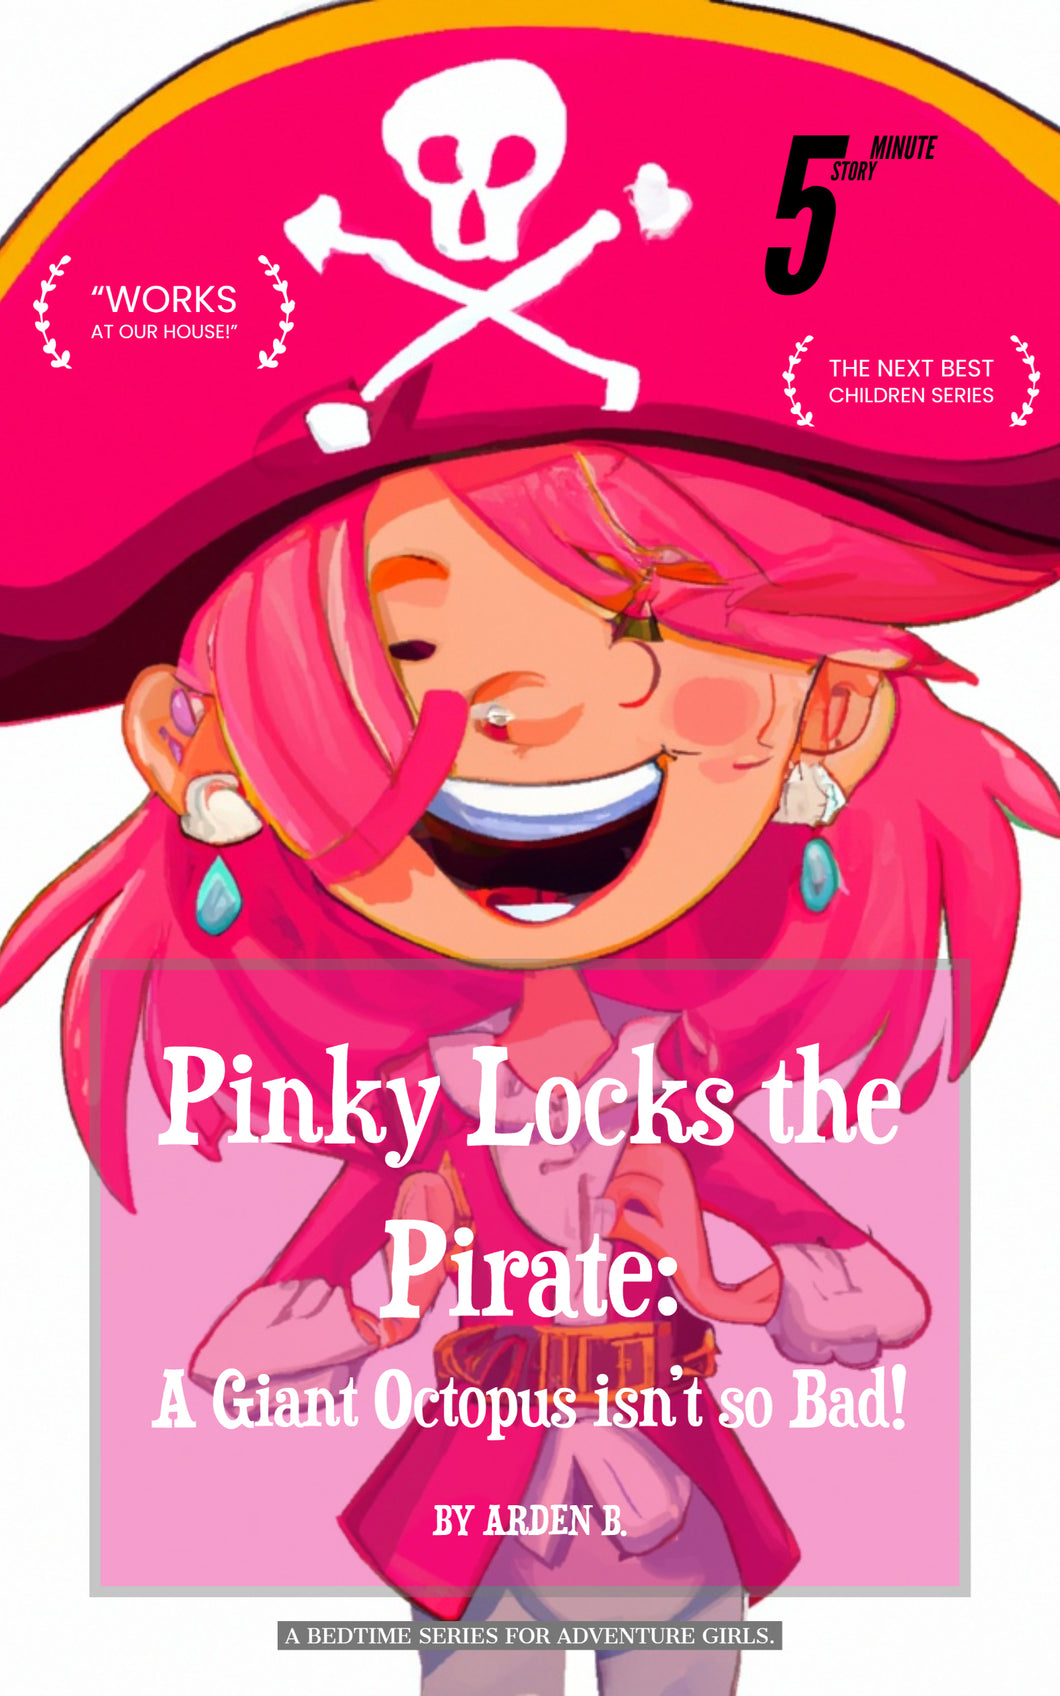 Pinky Locks the Pirate: A Giant Octopus isn't so Bad!